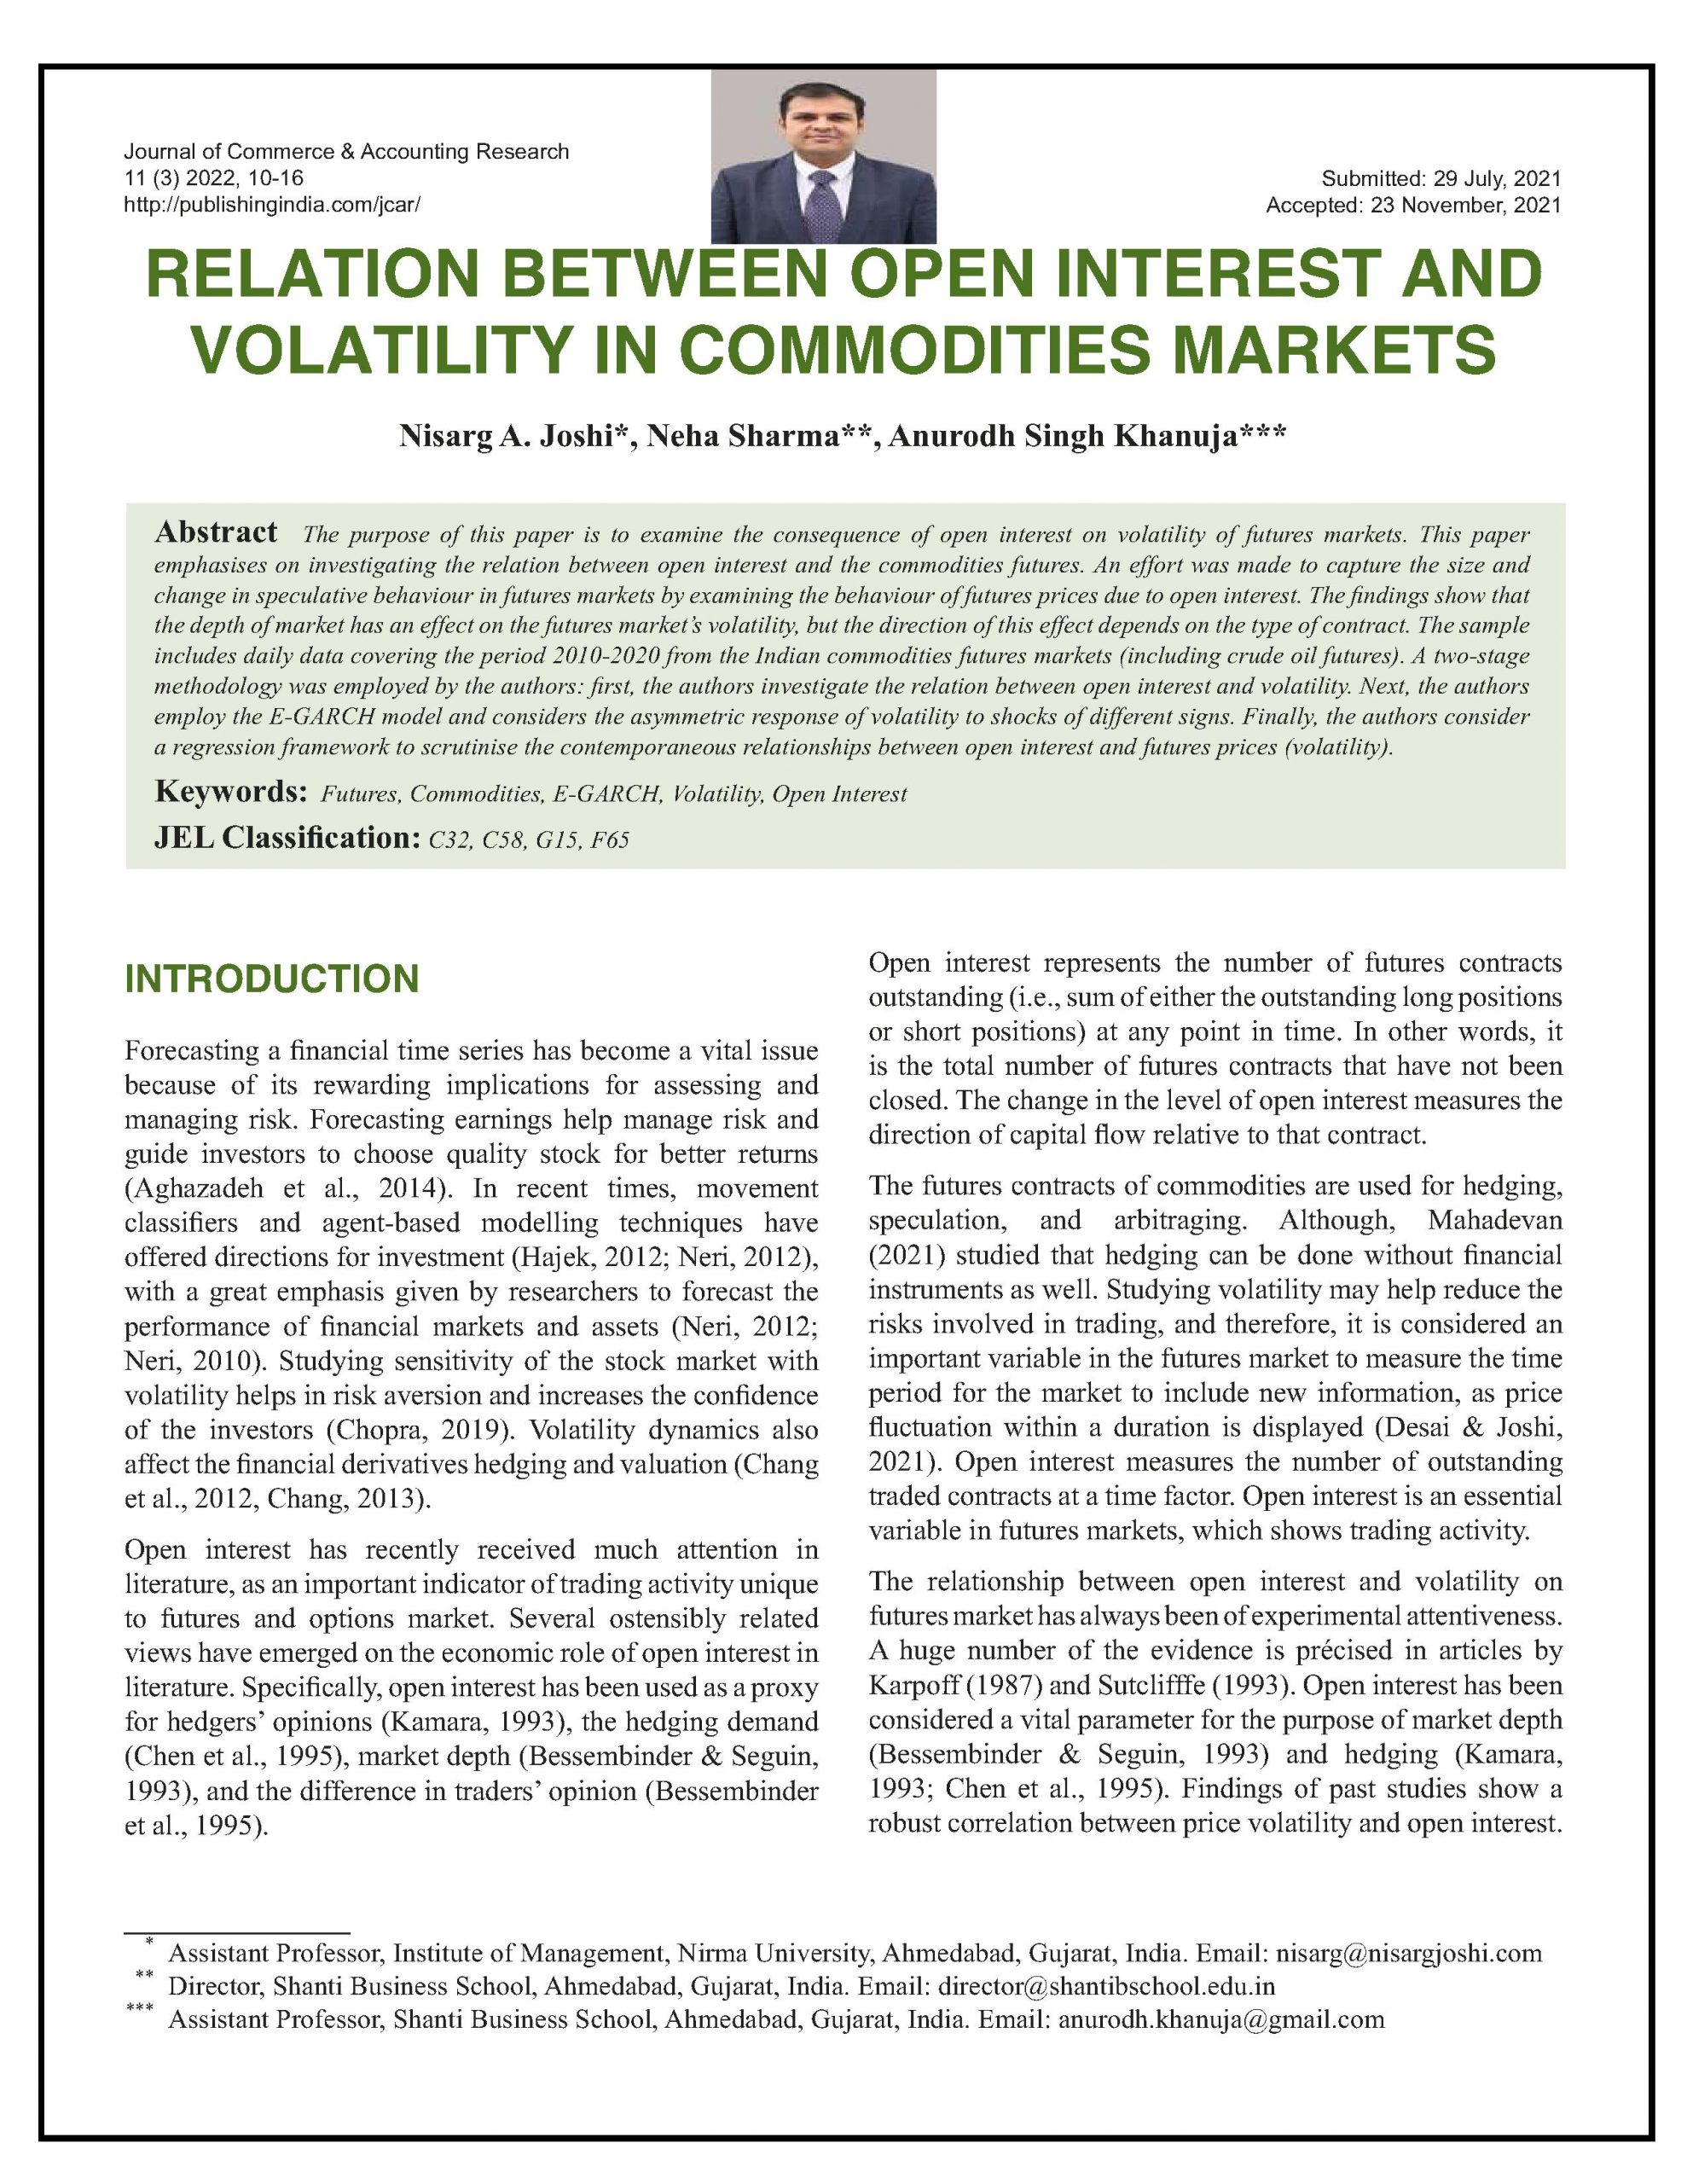 Relation Between Open Interest and Volatility in Commodities Markets